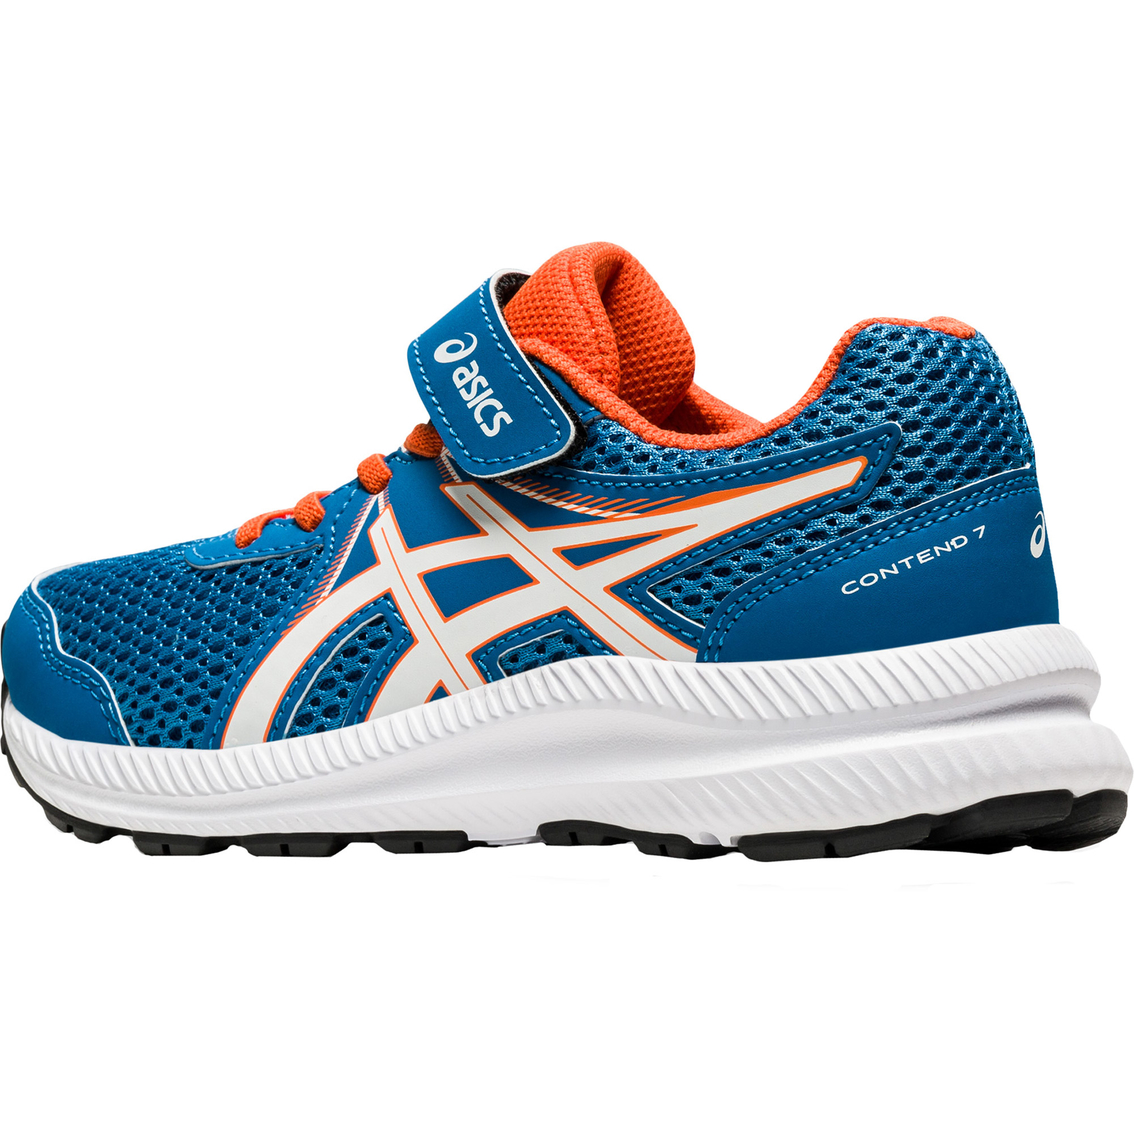 ASICS Preschool Boys Pre Contend 7 Running Shoes - Image 7 of 7